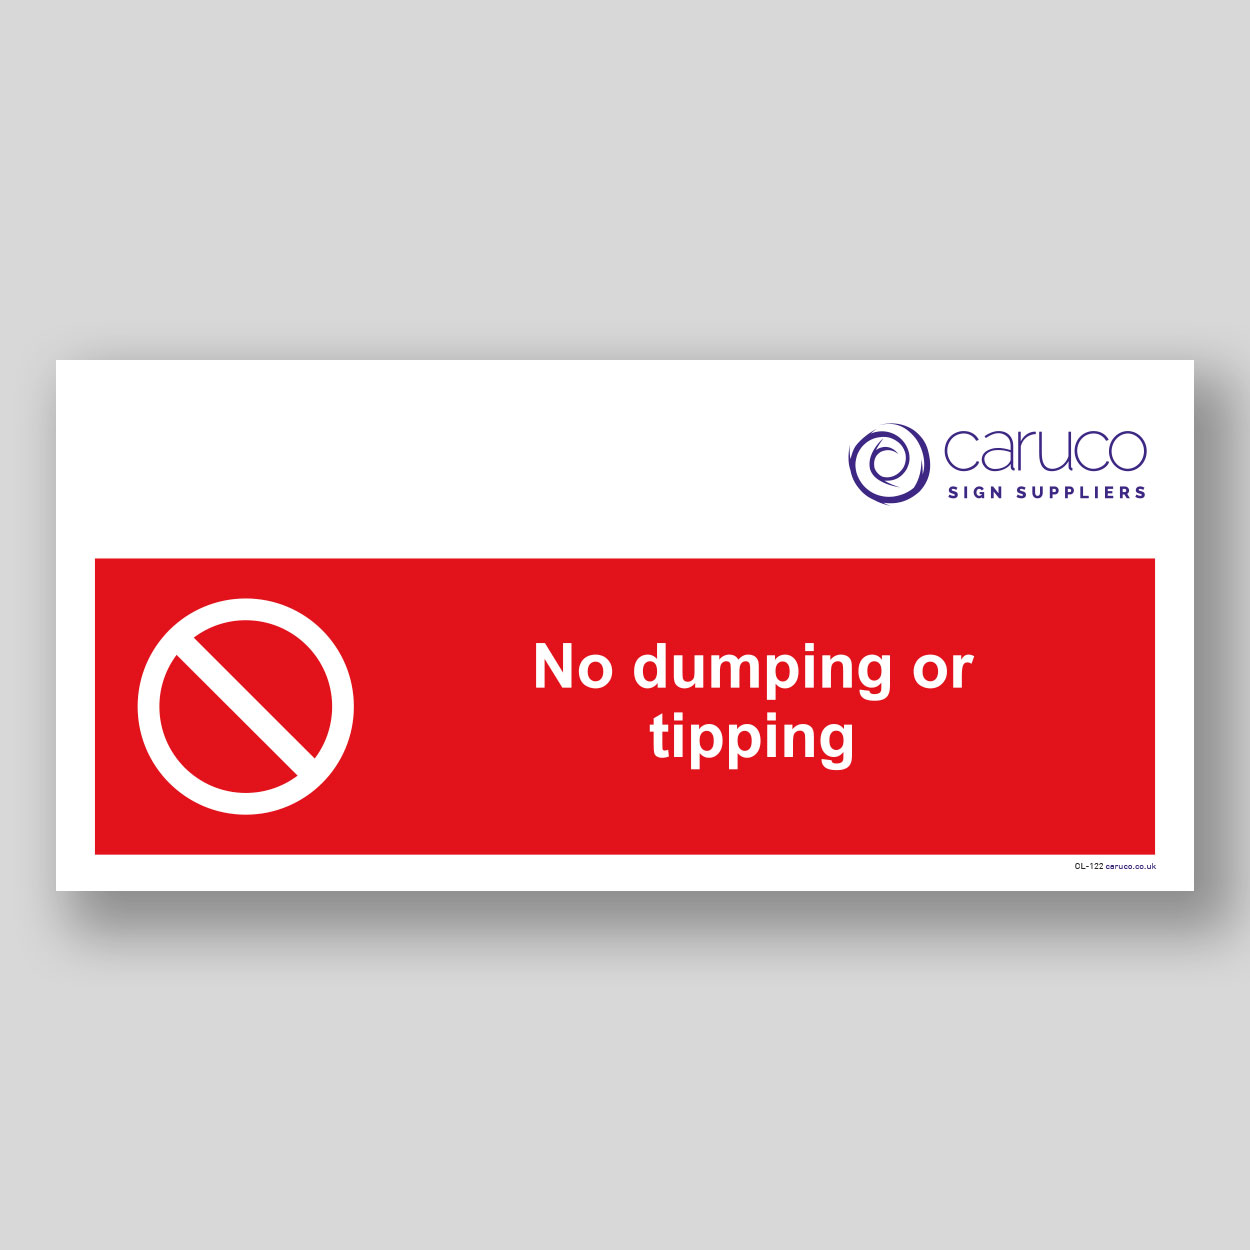 CL-122 No dumping or tipping